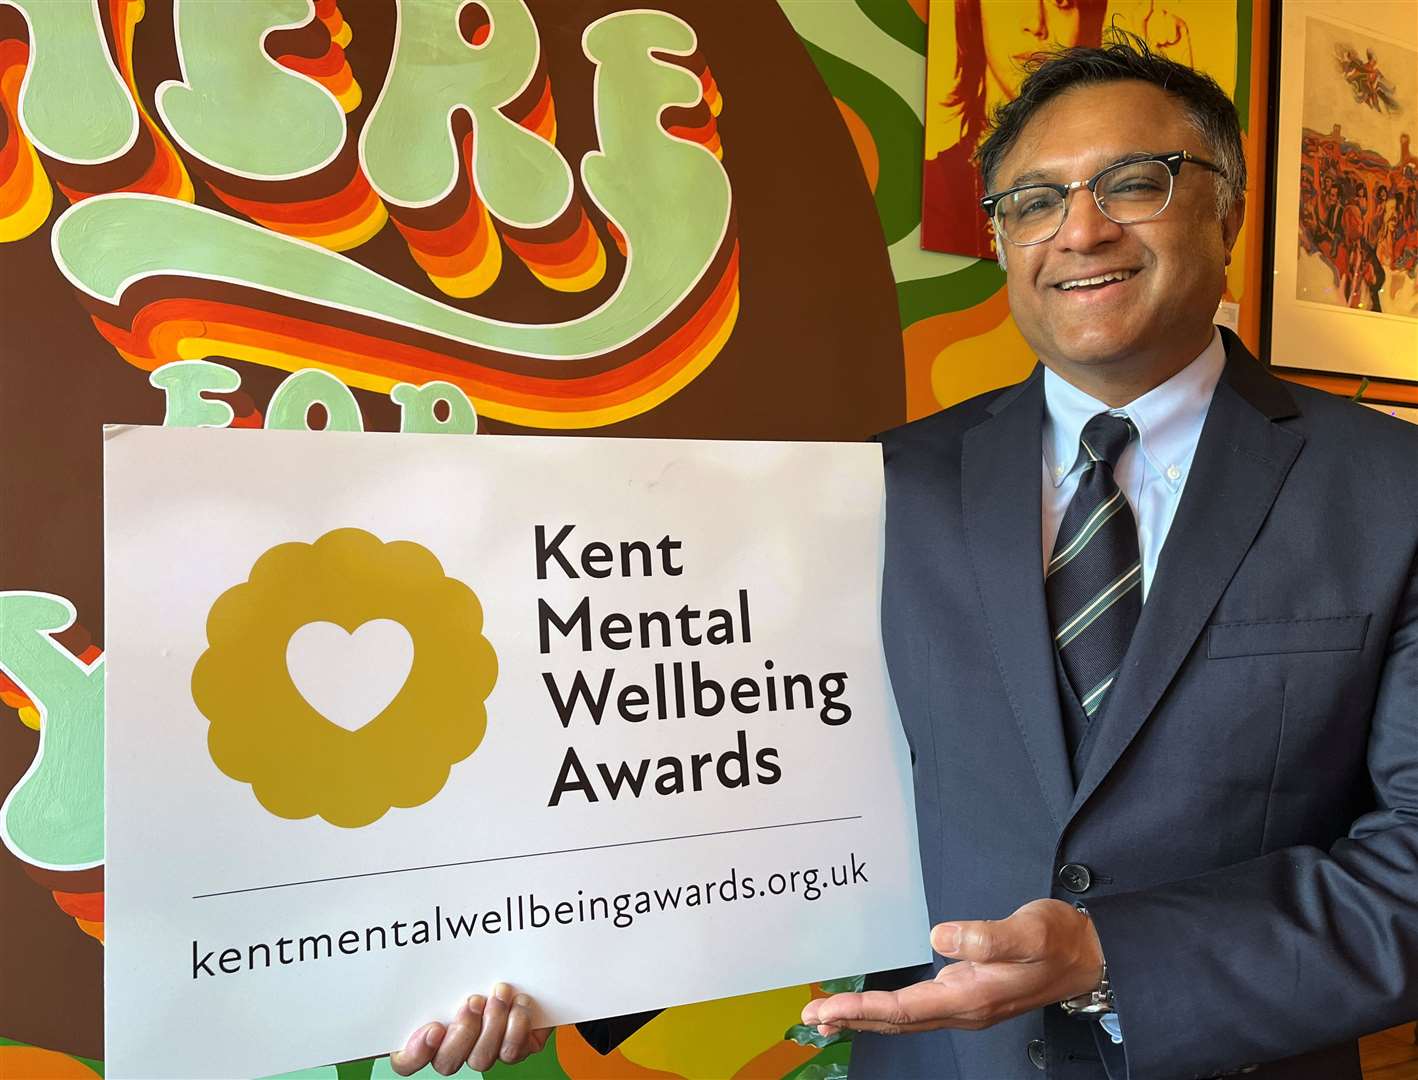 Director of Public Health at KCC Anjan Ghosh is encouraging people to enter the Kent Mental Wellbeing Awards